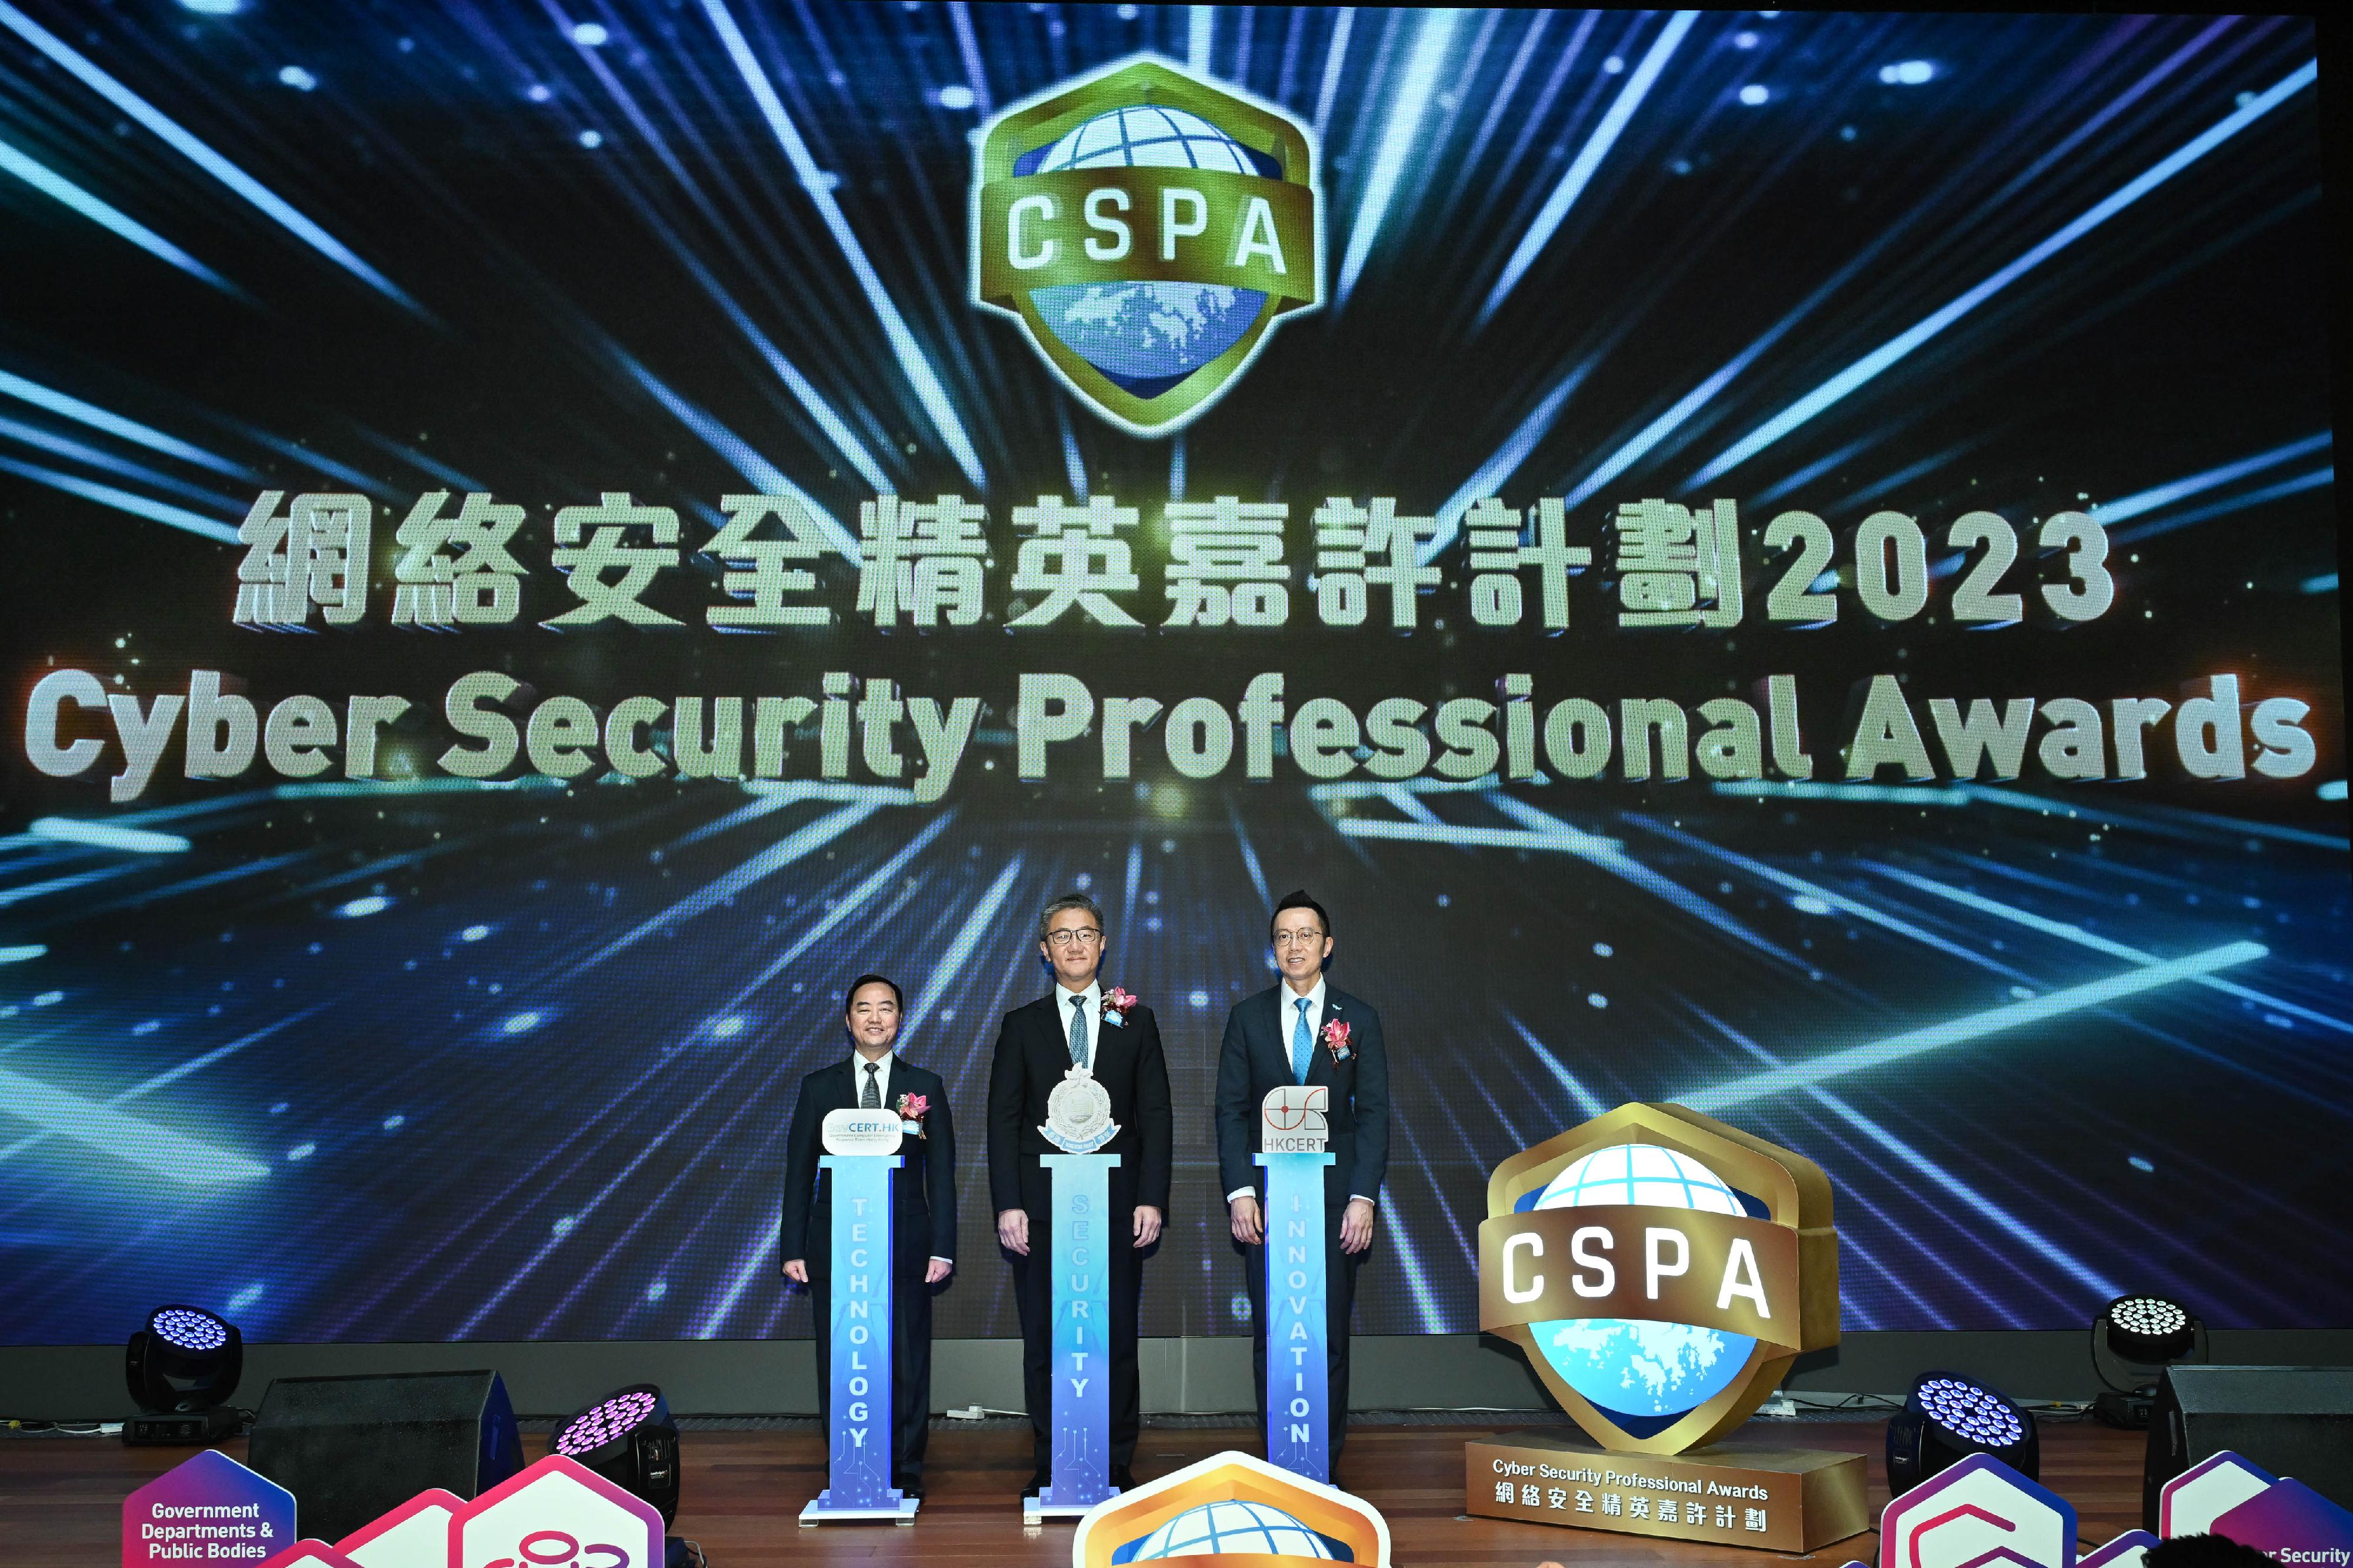 The Cyber Security Professional Awards 2023 presentation ceremony was held by the Hong Kong Police Force today (February 29). Photo shows (from left) the Government Chief Information Officer, Mr Tony Wong; the Commissioner of Police, Mr Siu Chak-yee; and the Chief Digital Officer of the Hong Kong Productivity Council, Mr Edmond Lai; officiating at the kick-off ceremony.